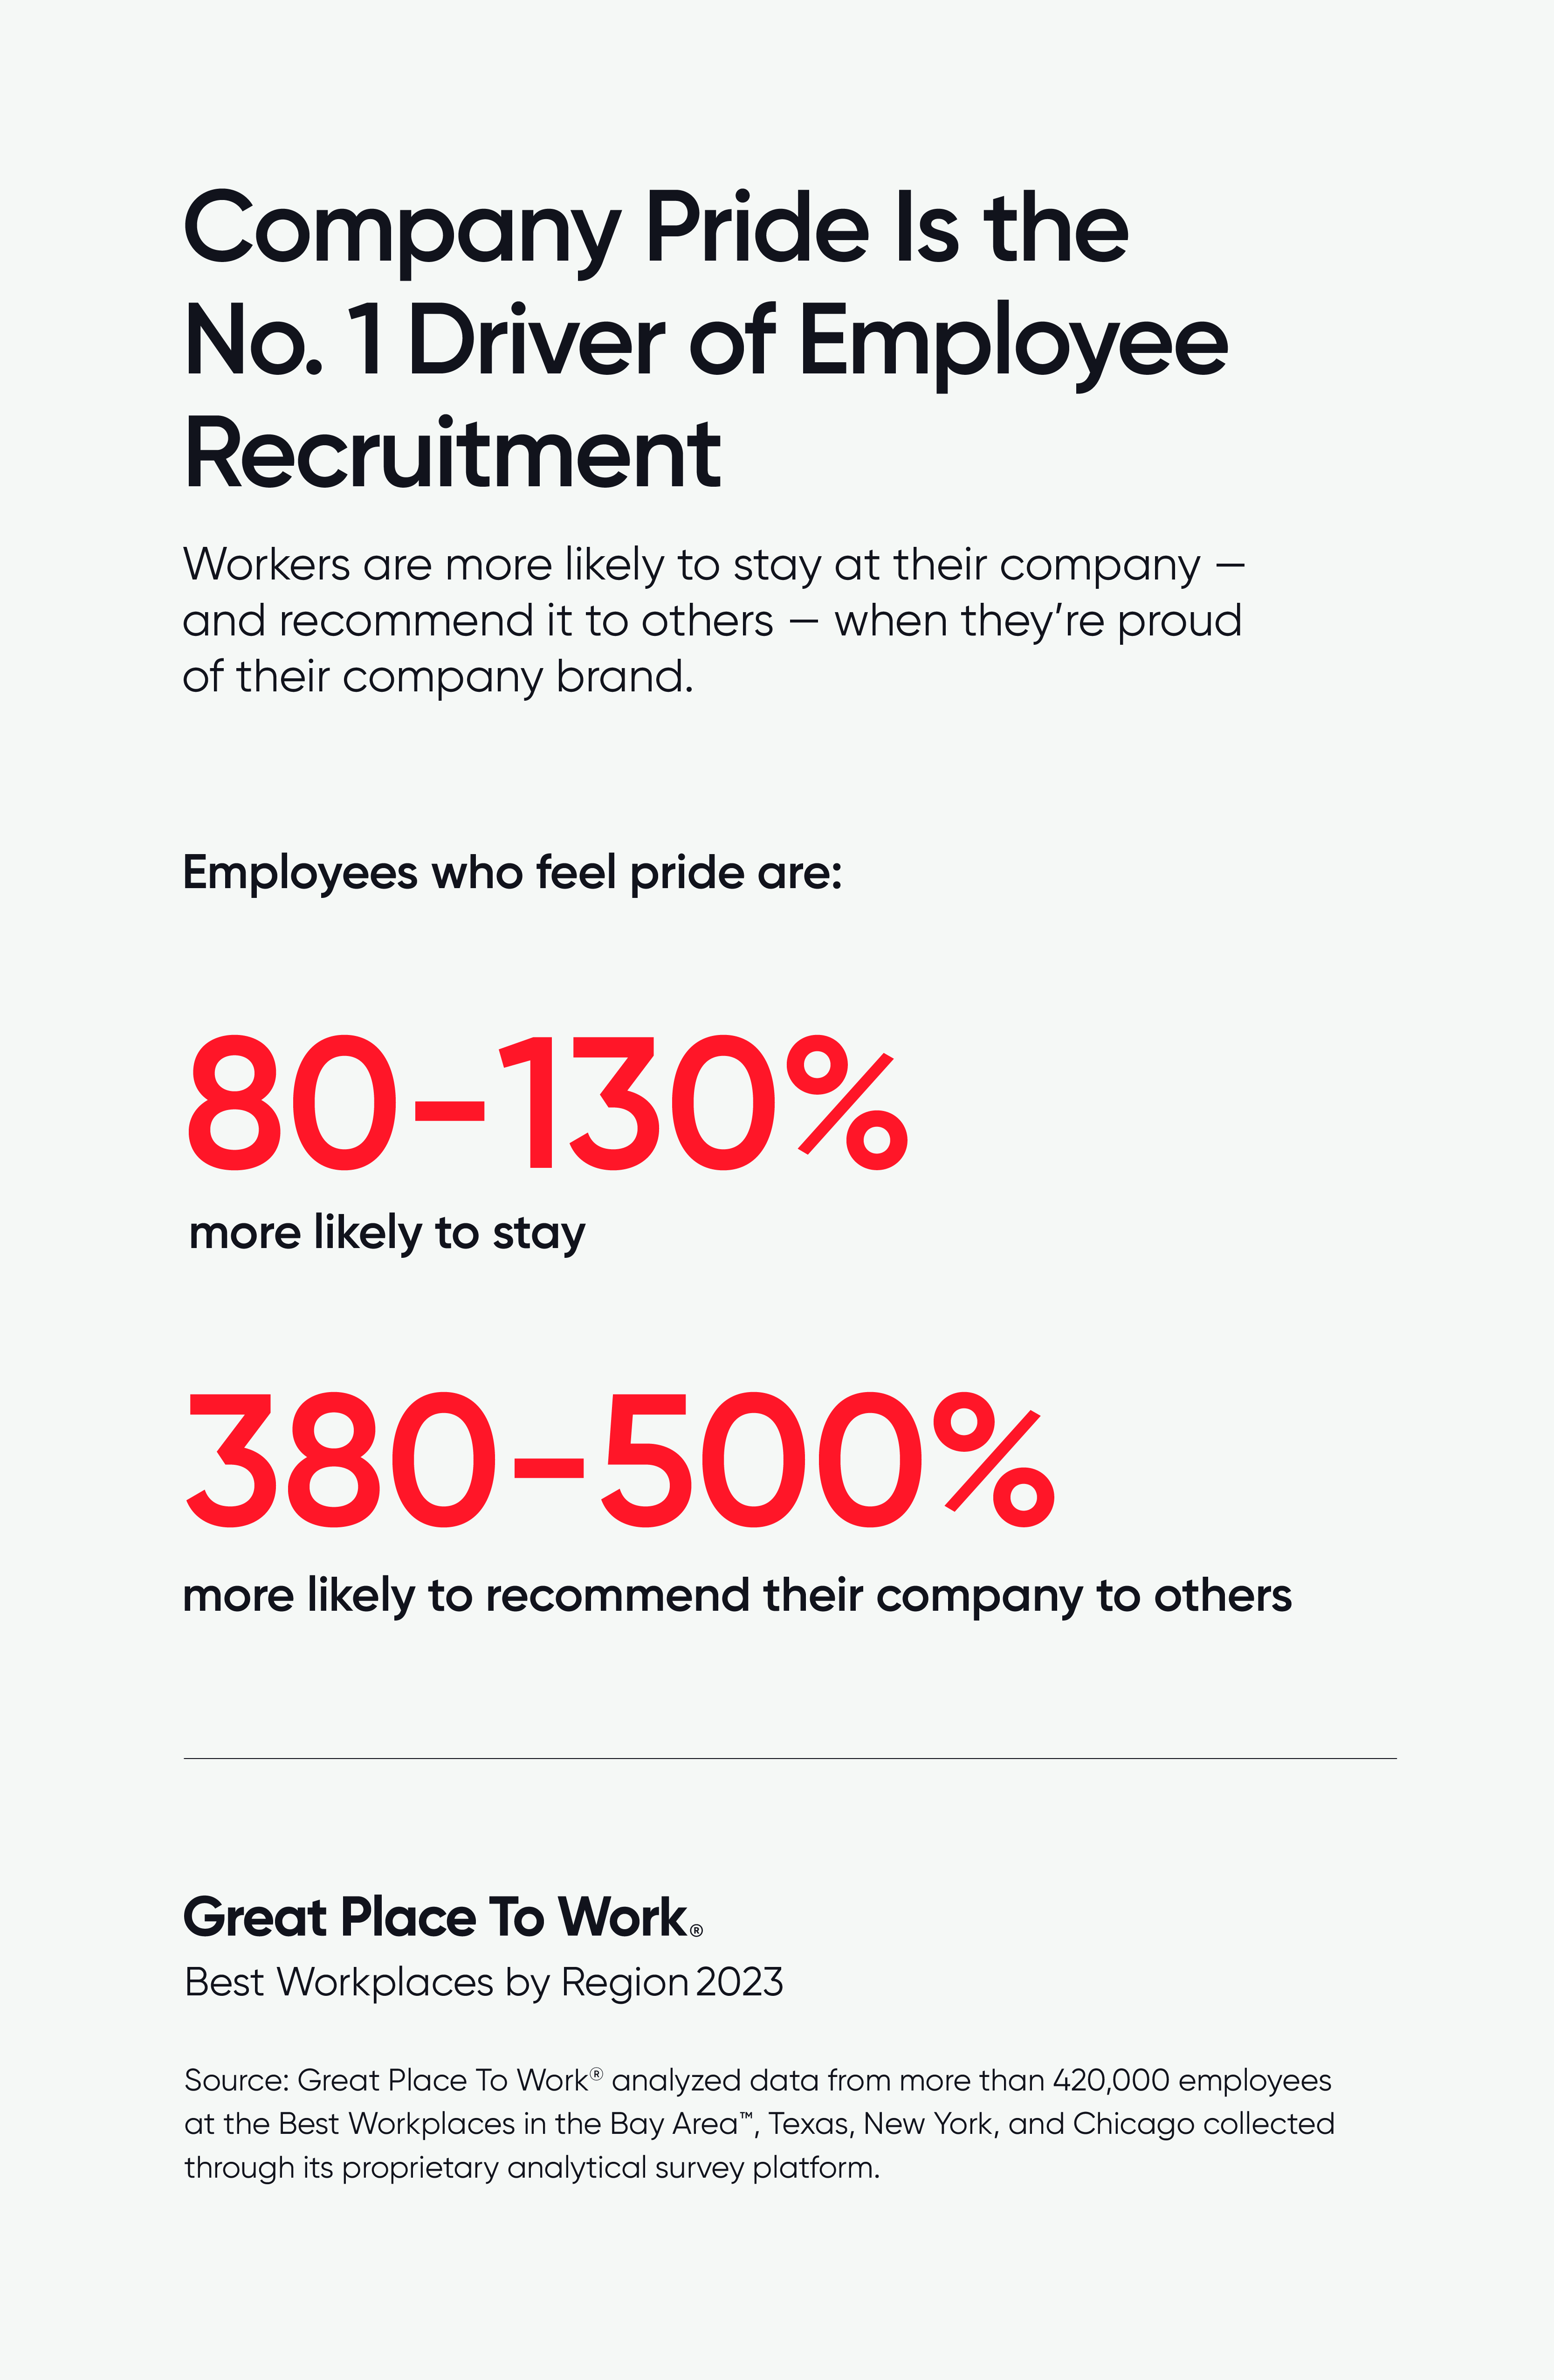 Company Pride is the No. Driver of Employee Recruitment 